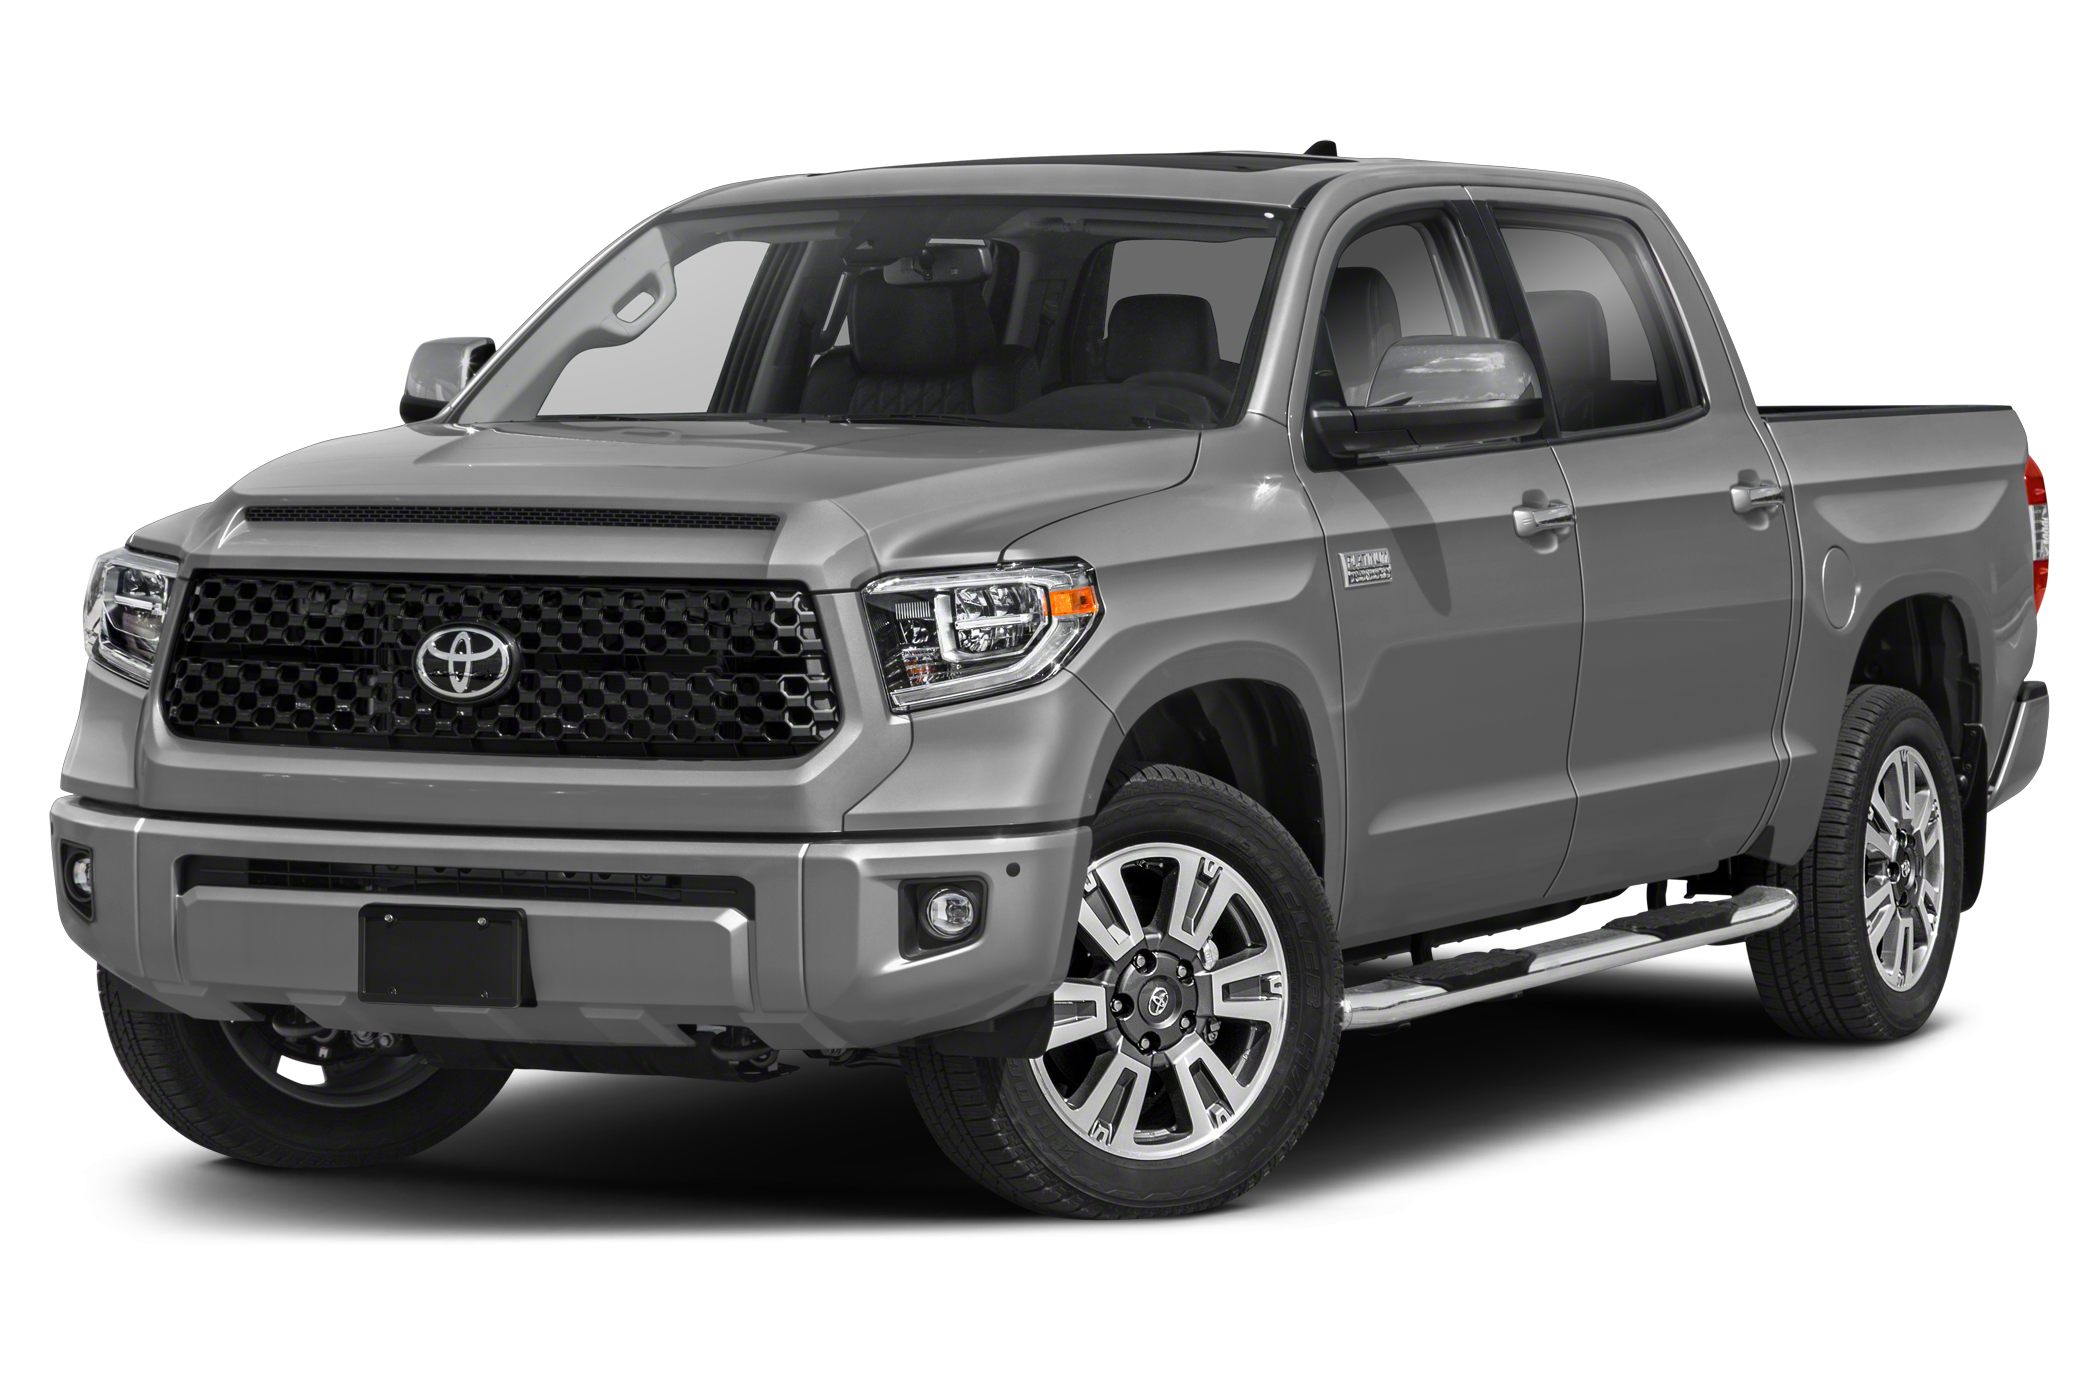 2021 Toyota Tundra Platinum 5.7L V8 4x4 CrewMax 5.5 ft. box 145.7 in. WB  Pictures